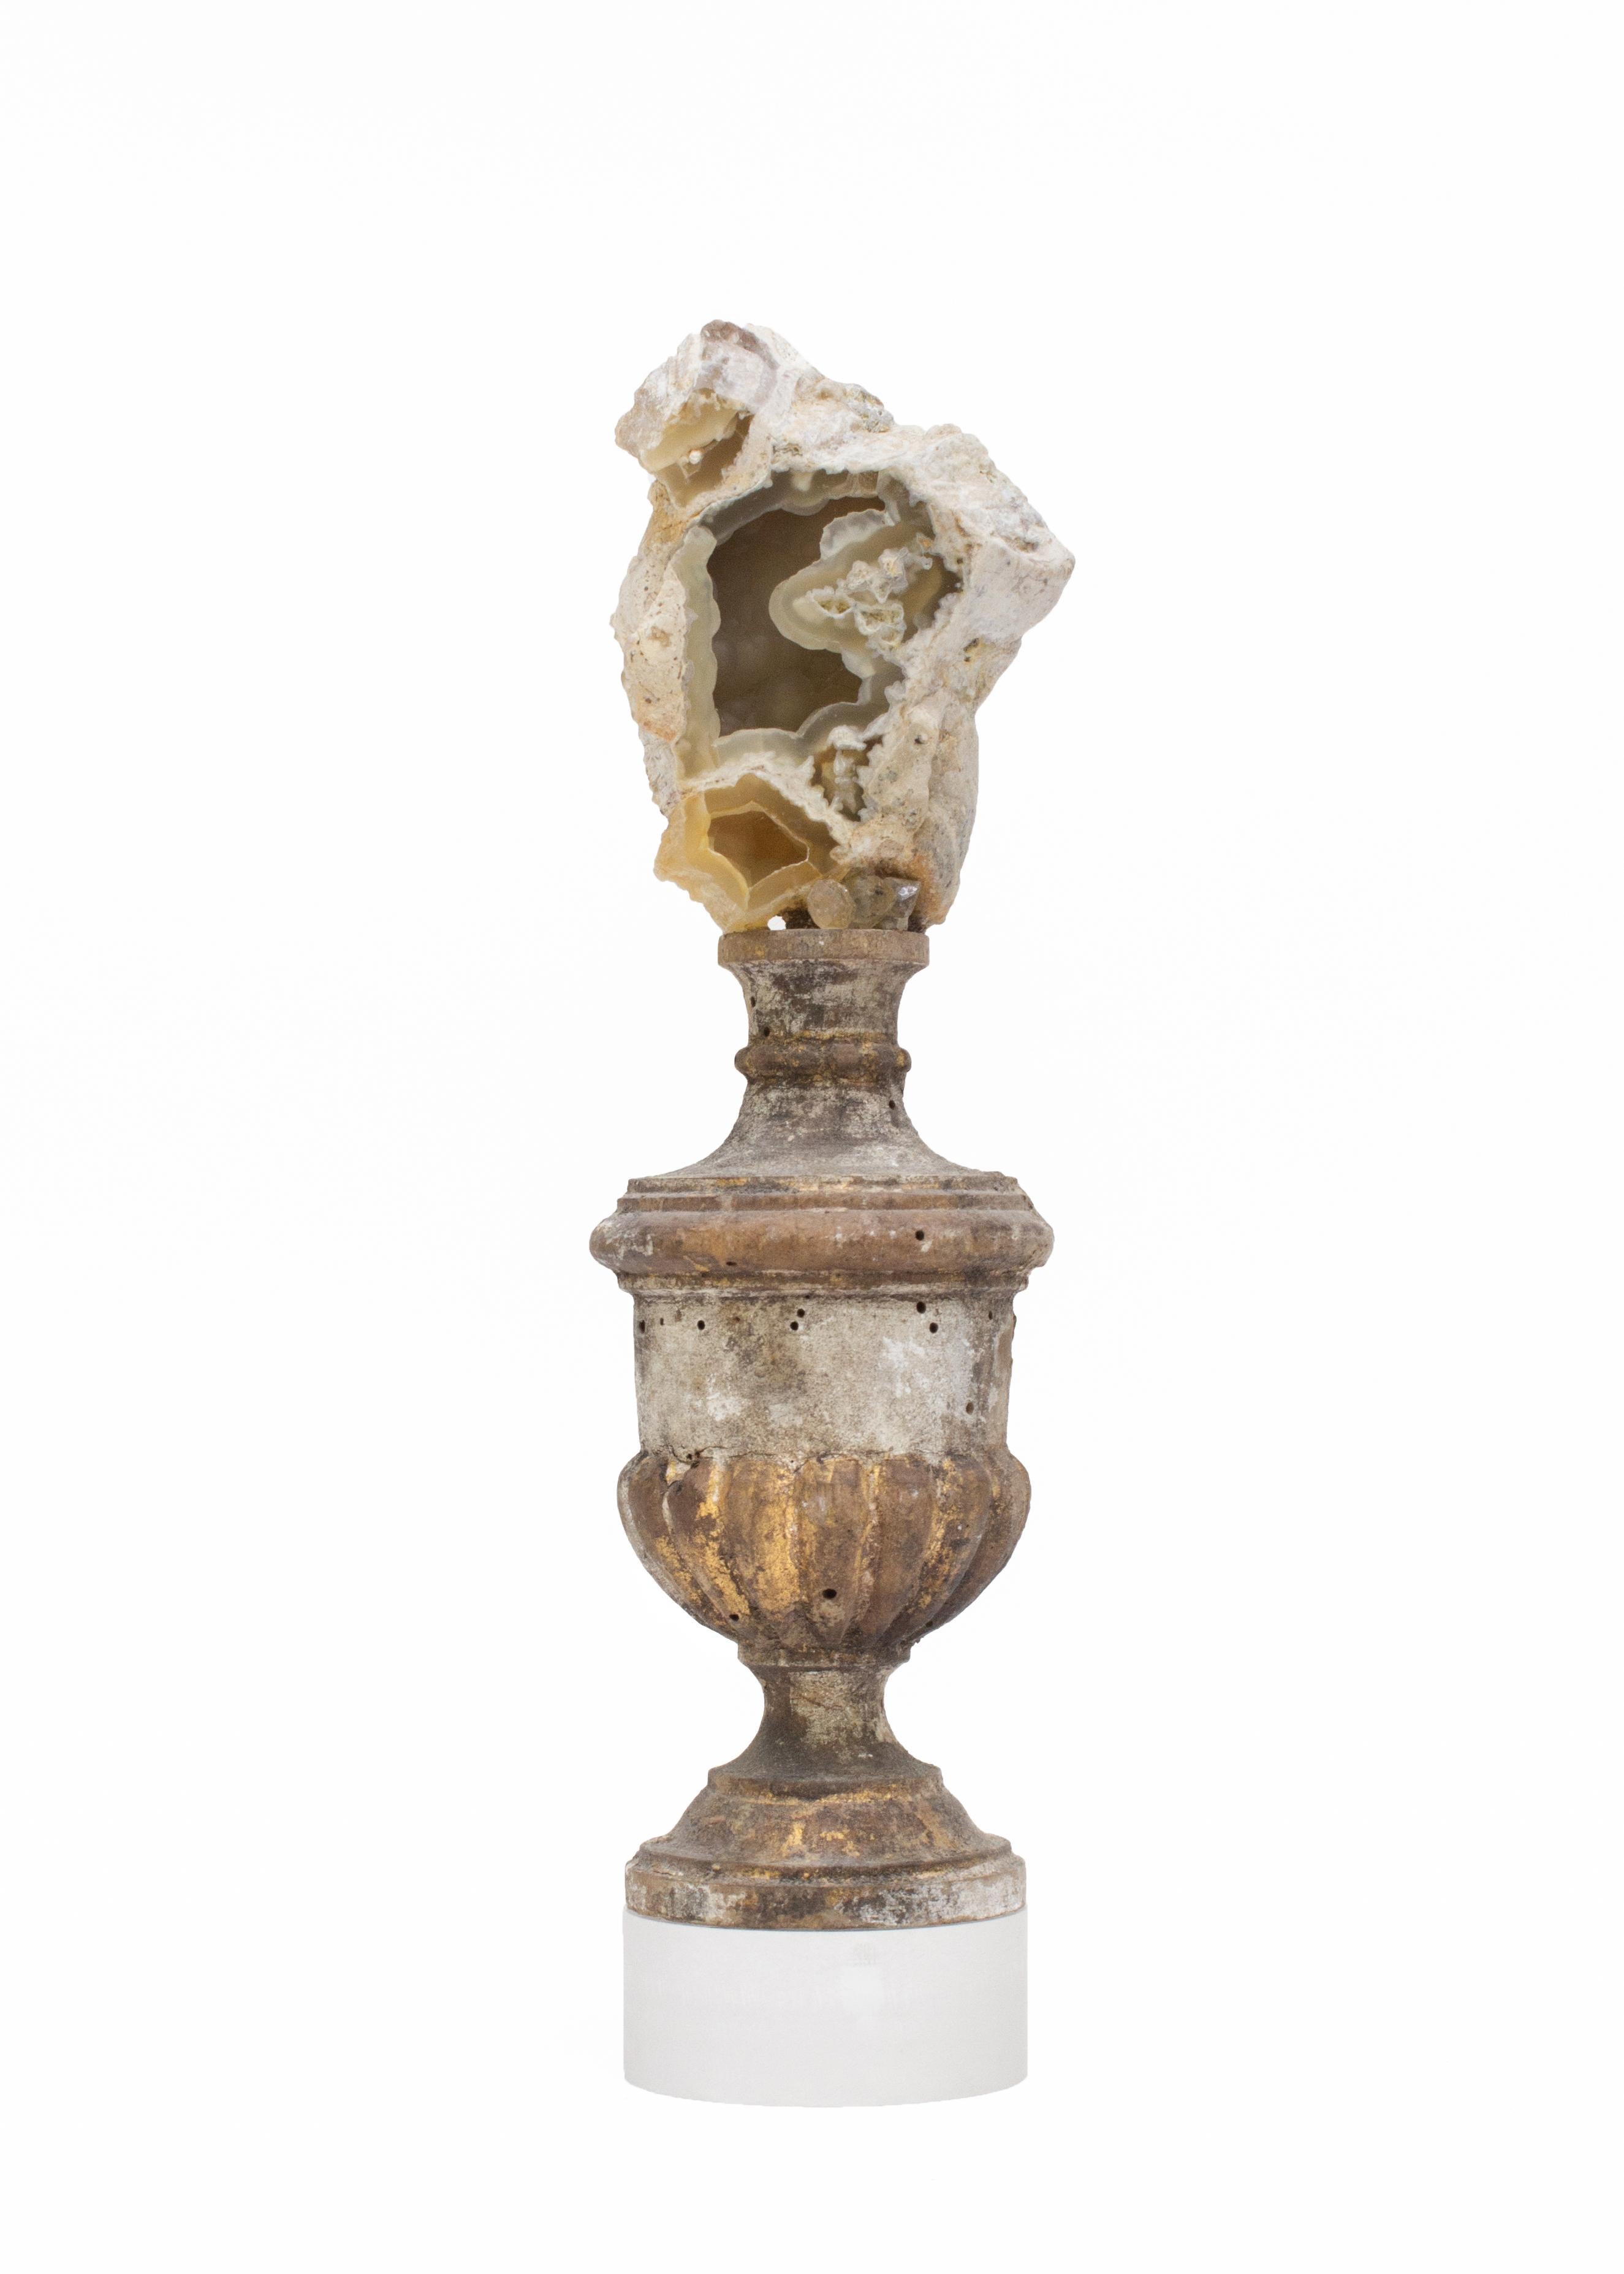 18th Century Italian fragment with fossil agate coral and Herkimer diamonds on a lucite base.

This fragment is from a church in Venice. Fossil agate coral is mounted on top of the artifact. Fossil agate coral is Florida's state stone and is known